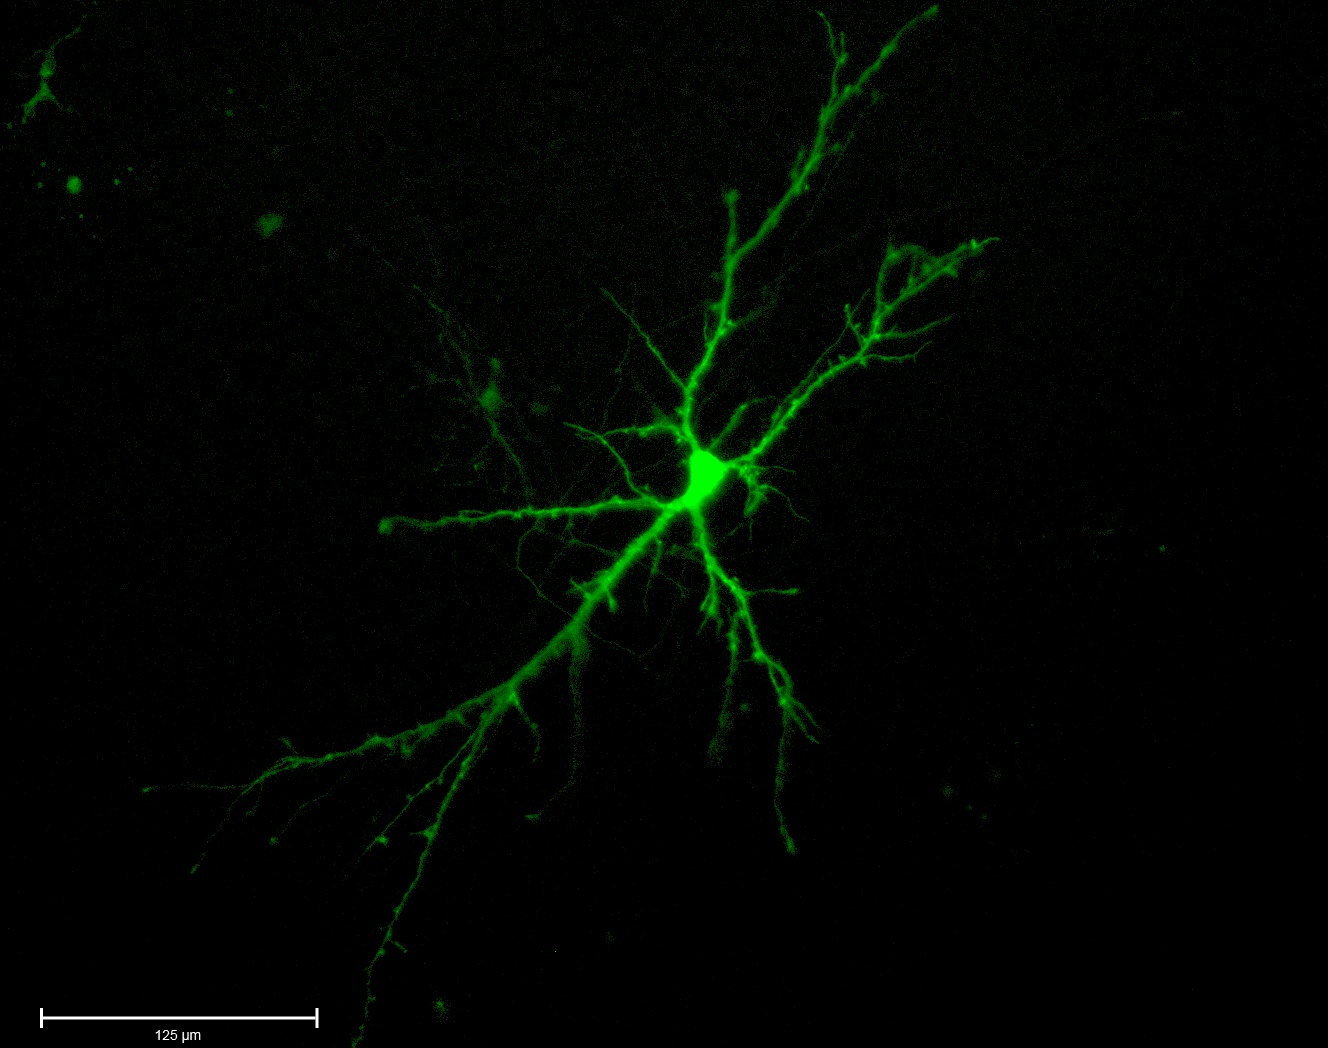 A neuron, or brain cell, glows green on a black background.